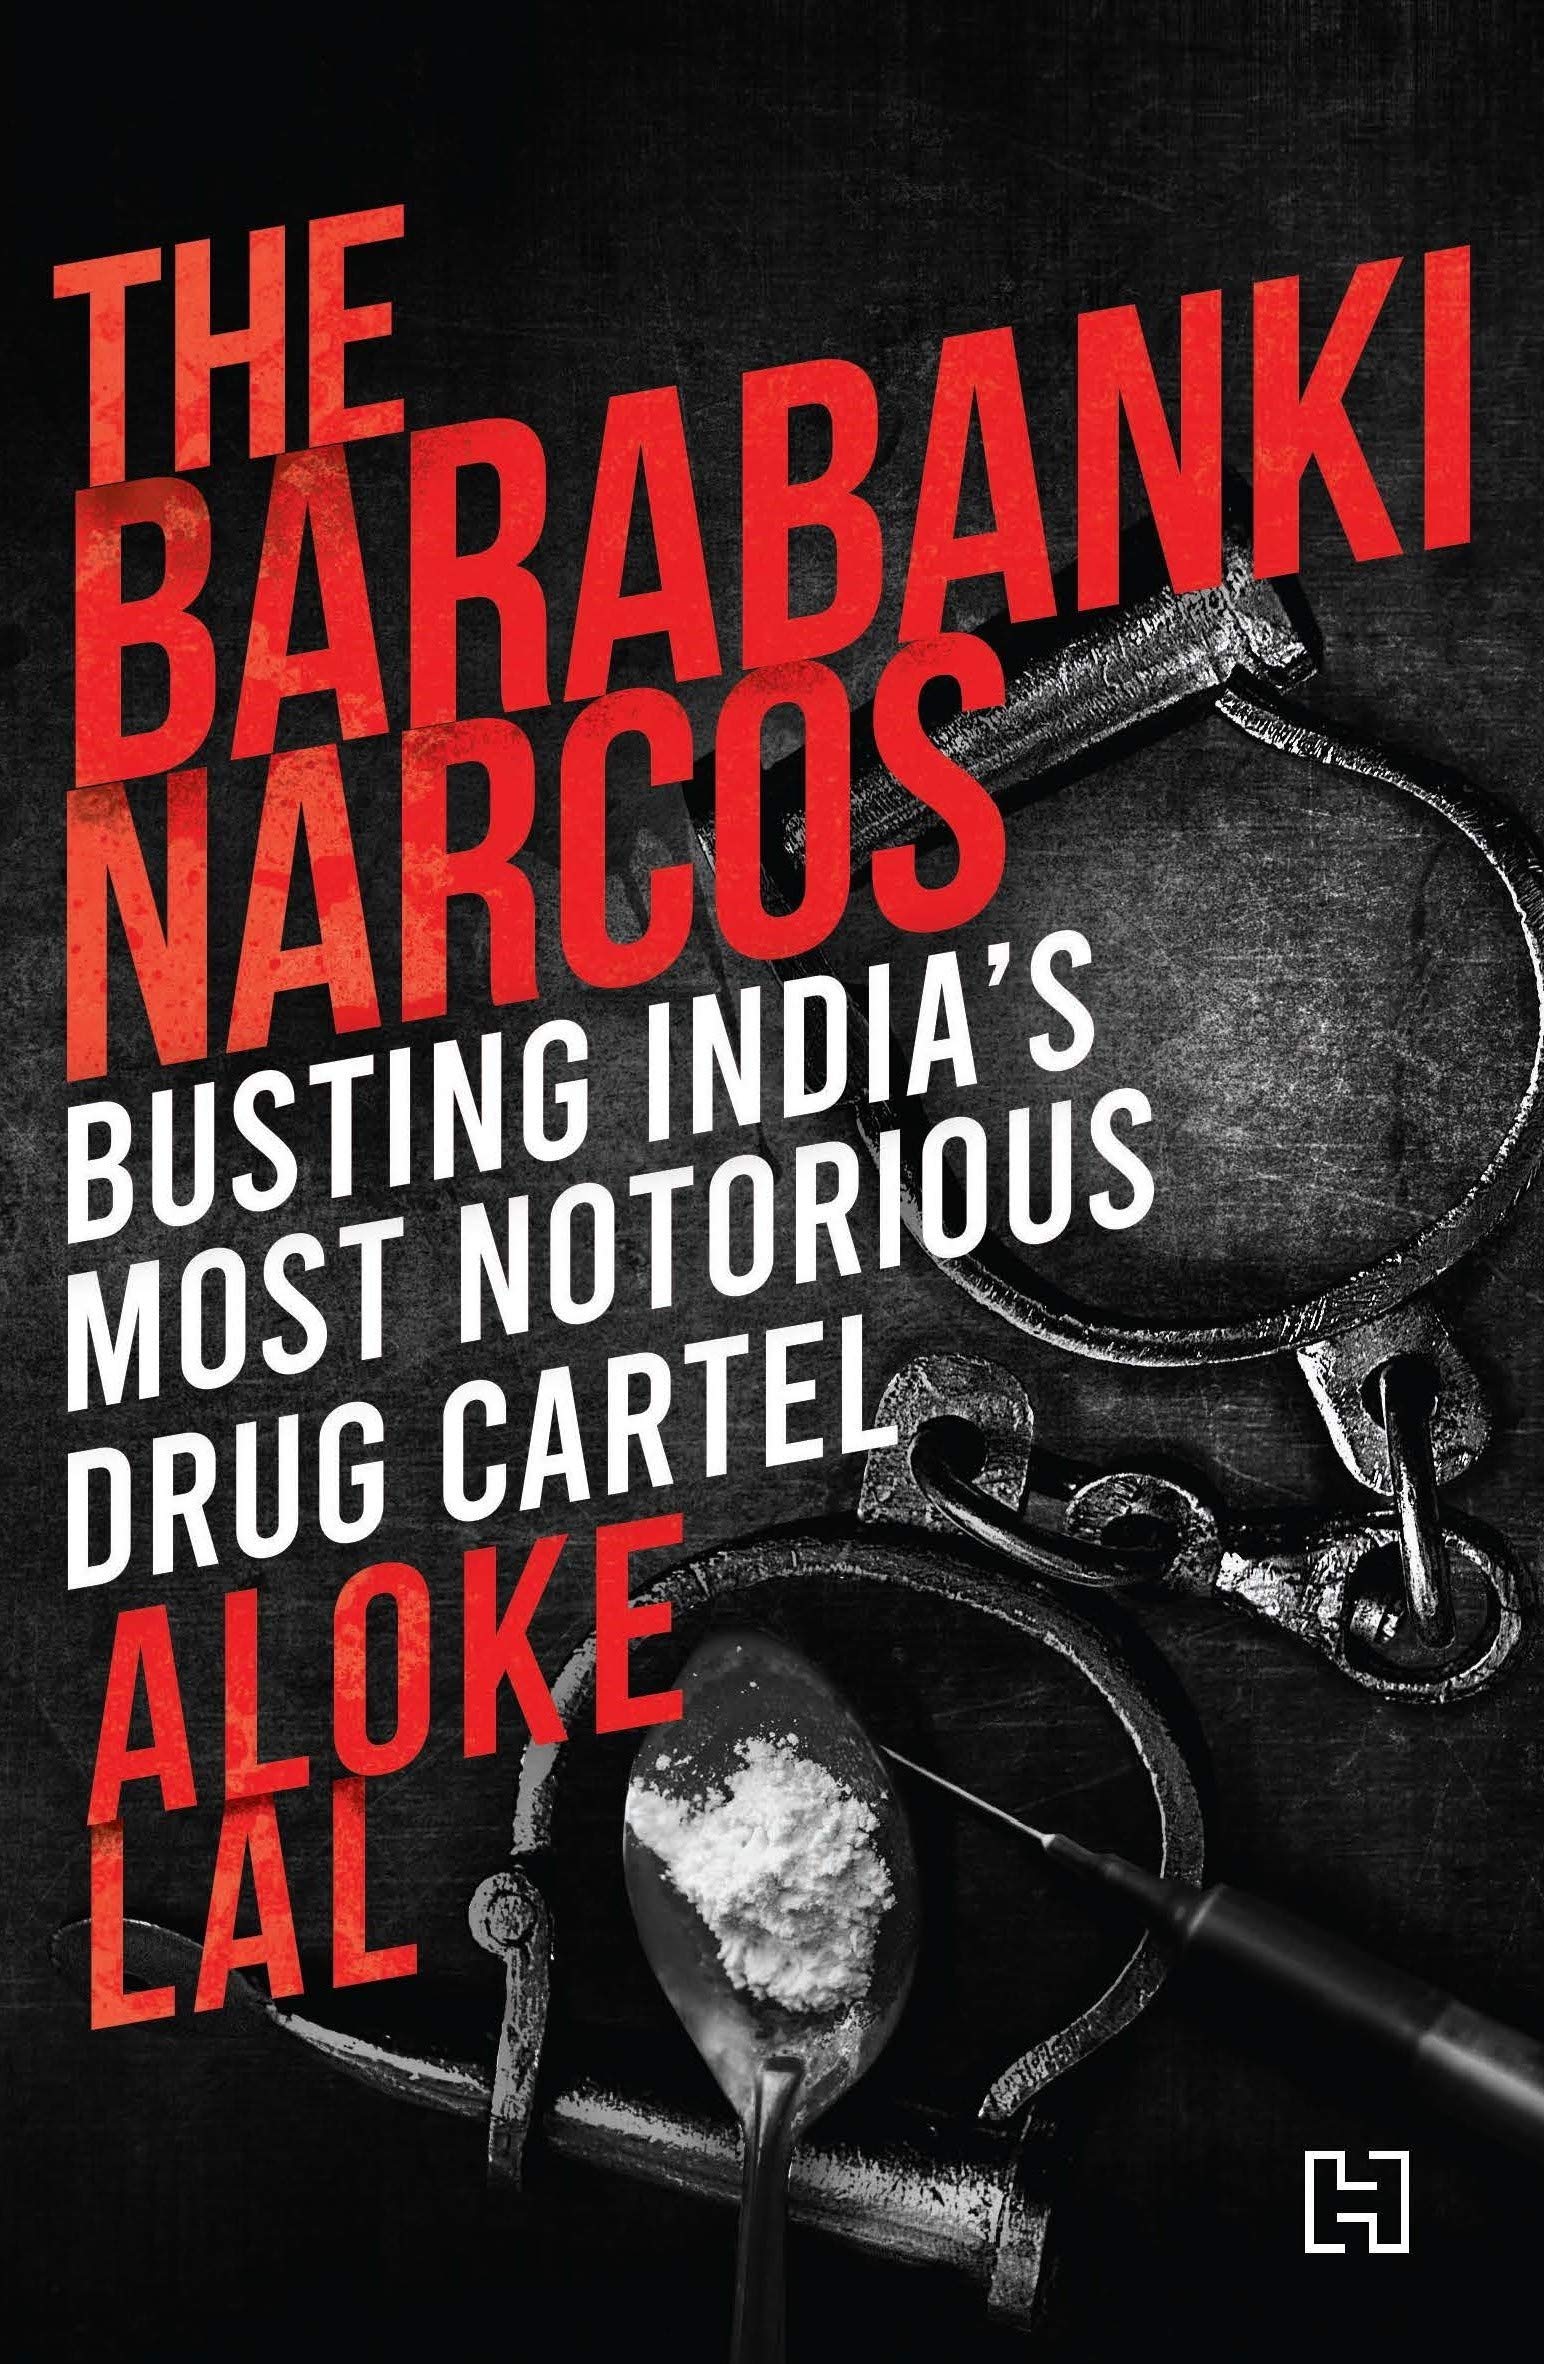 "The Barabanki Narcos" is the true account behind the largest-ever opium bust in history, narrated by the man who led the action at the centre of it all